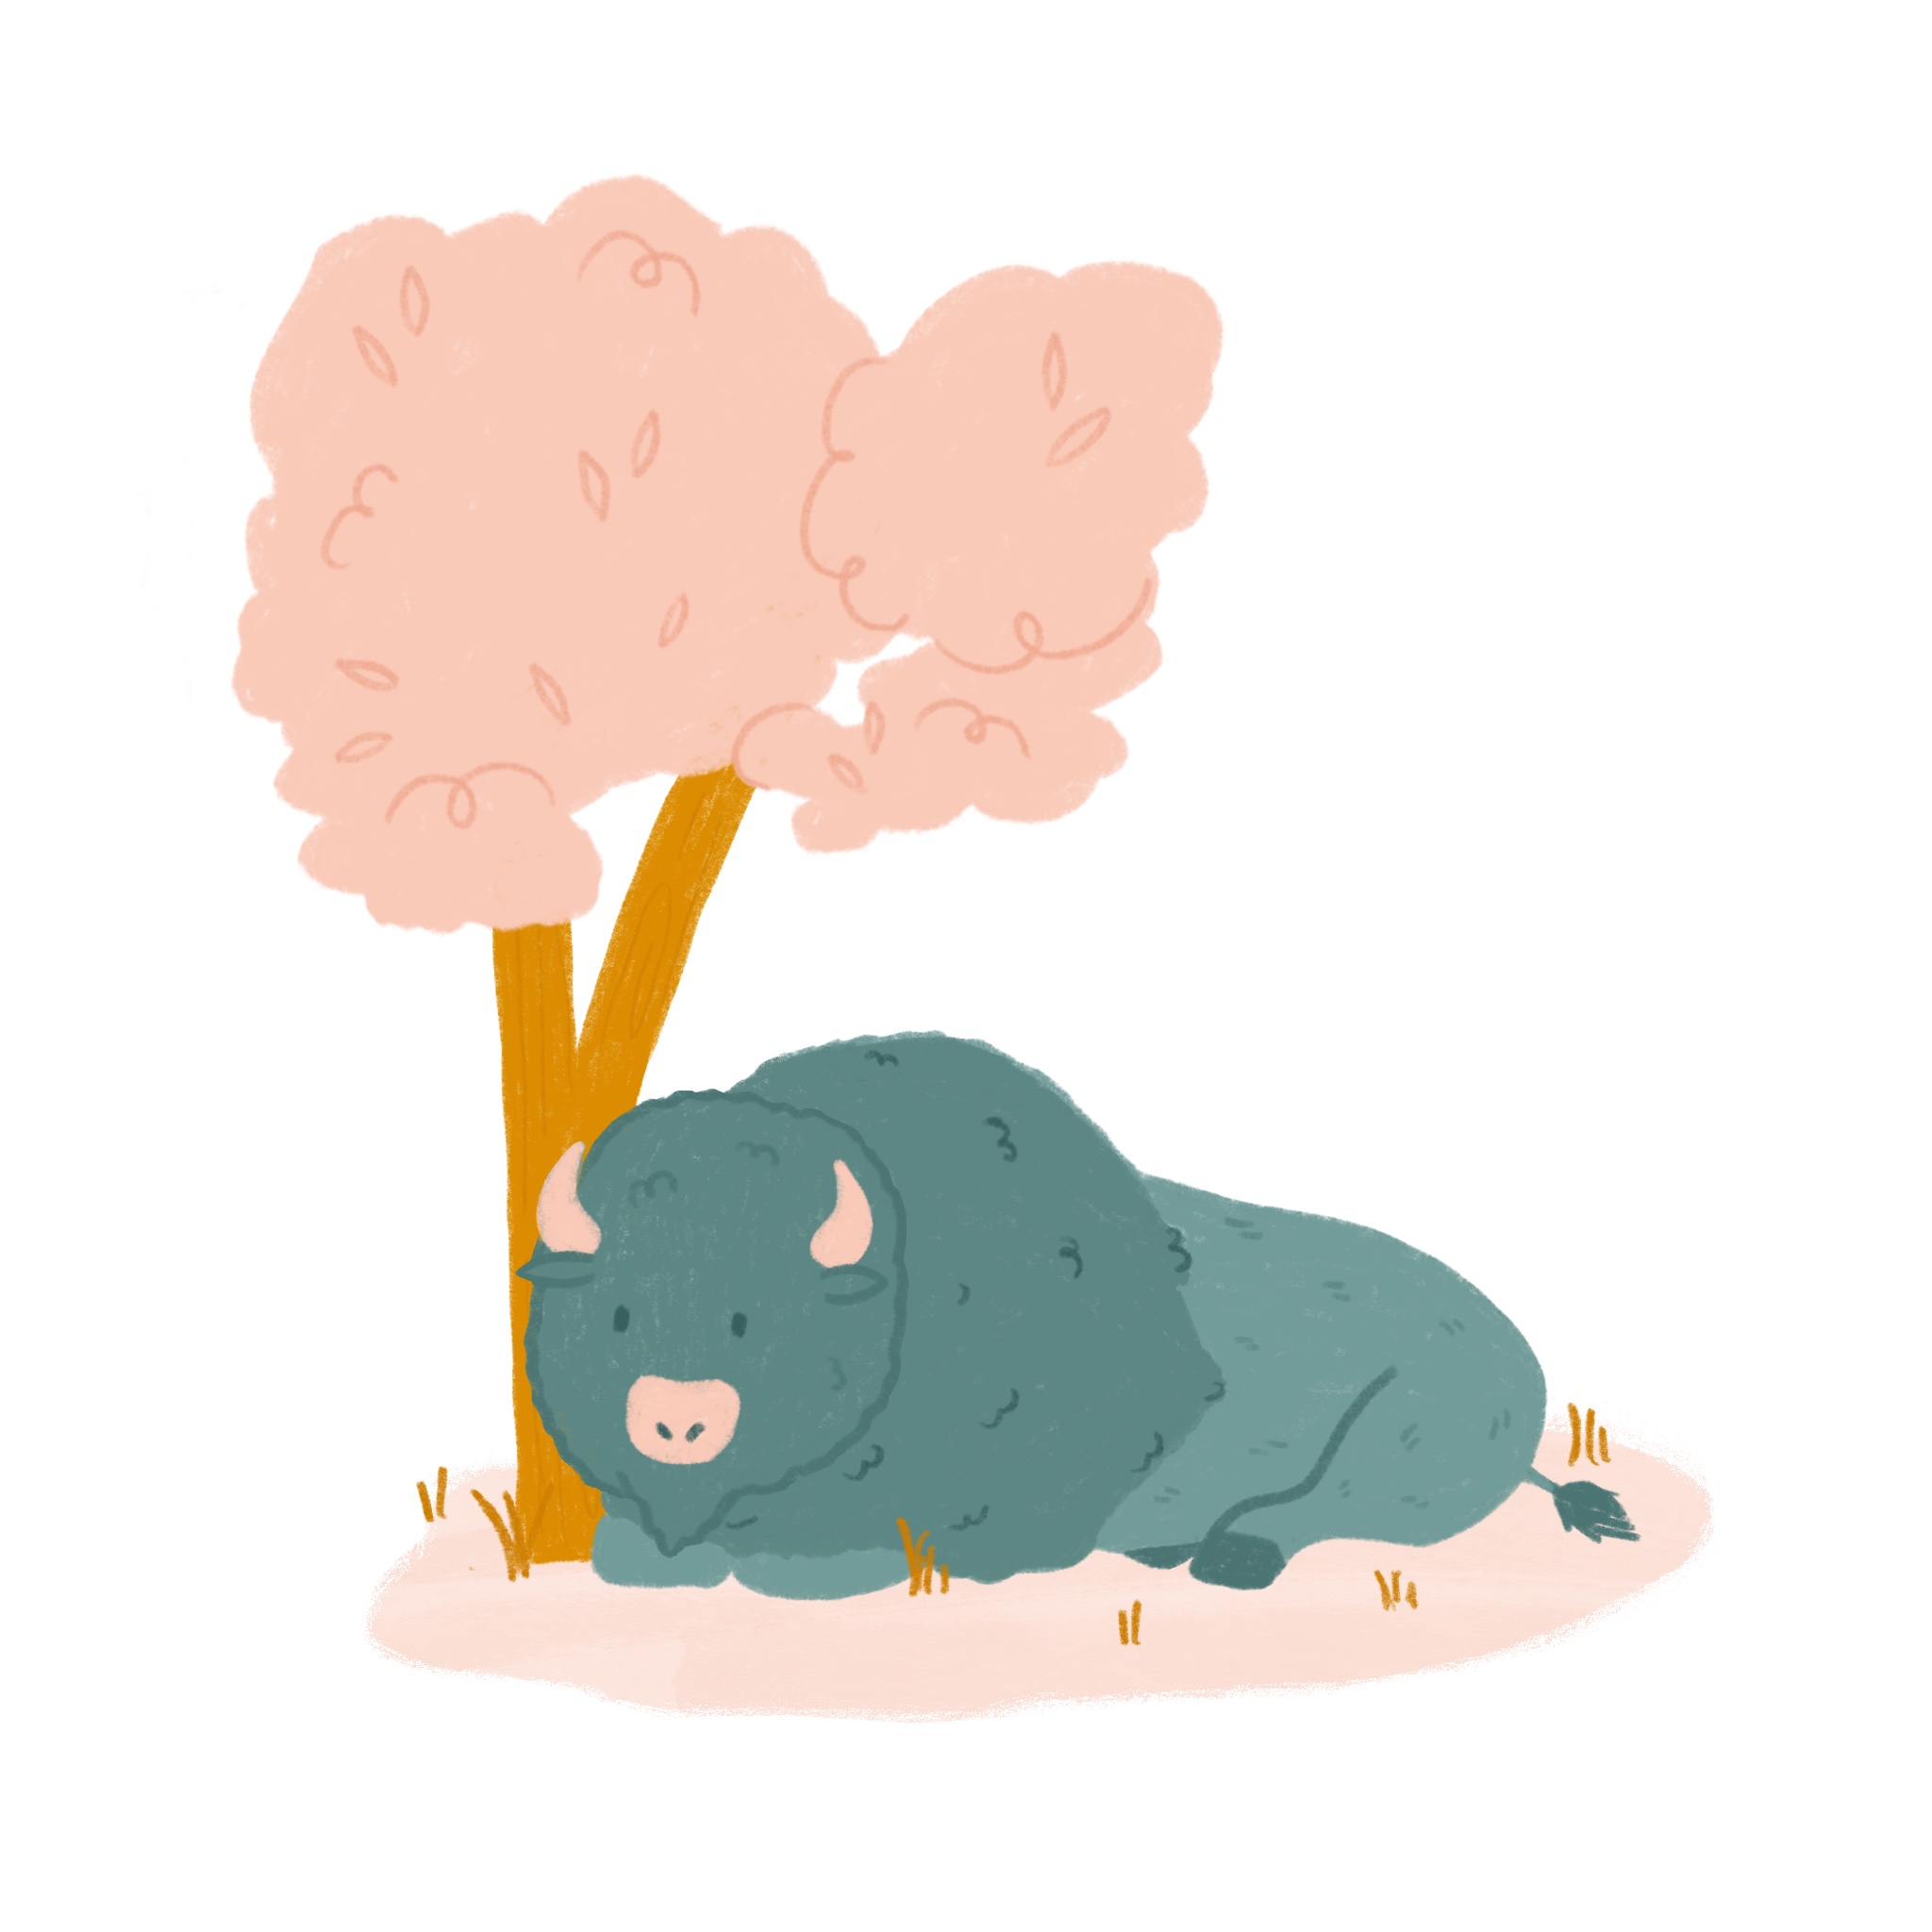 An illustration of a Bison resting under a tree